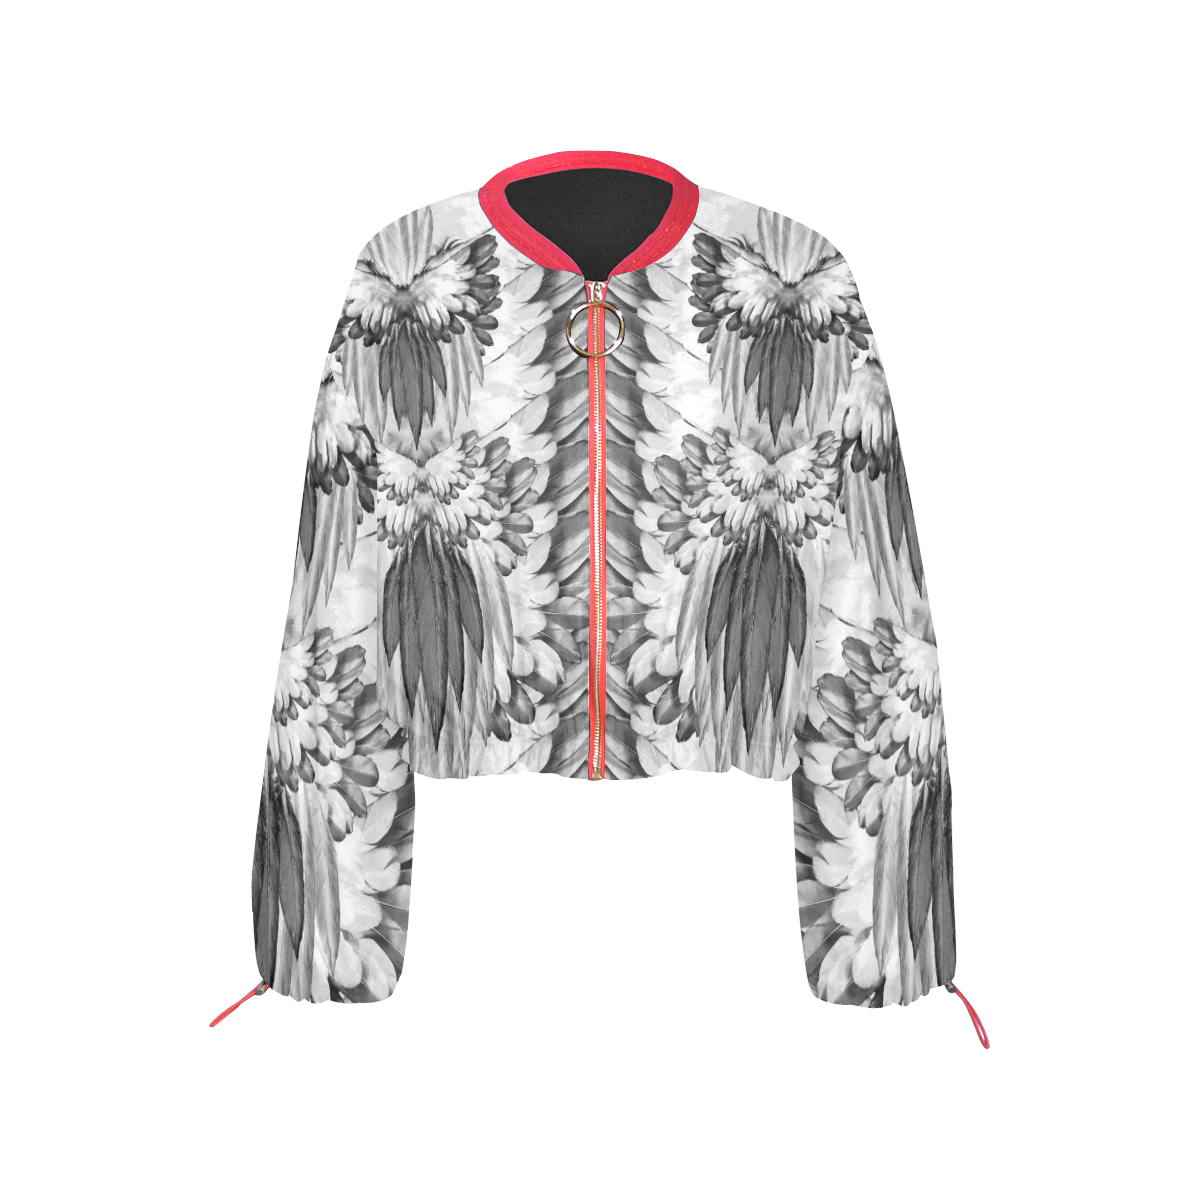 feathers 6 Cropped Chiffon Jacket for Women (Model H30)